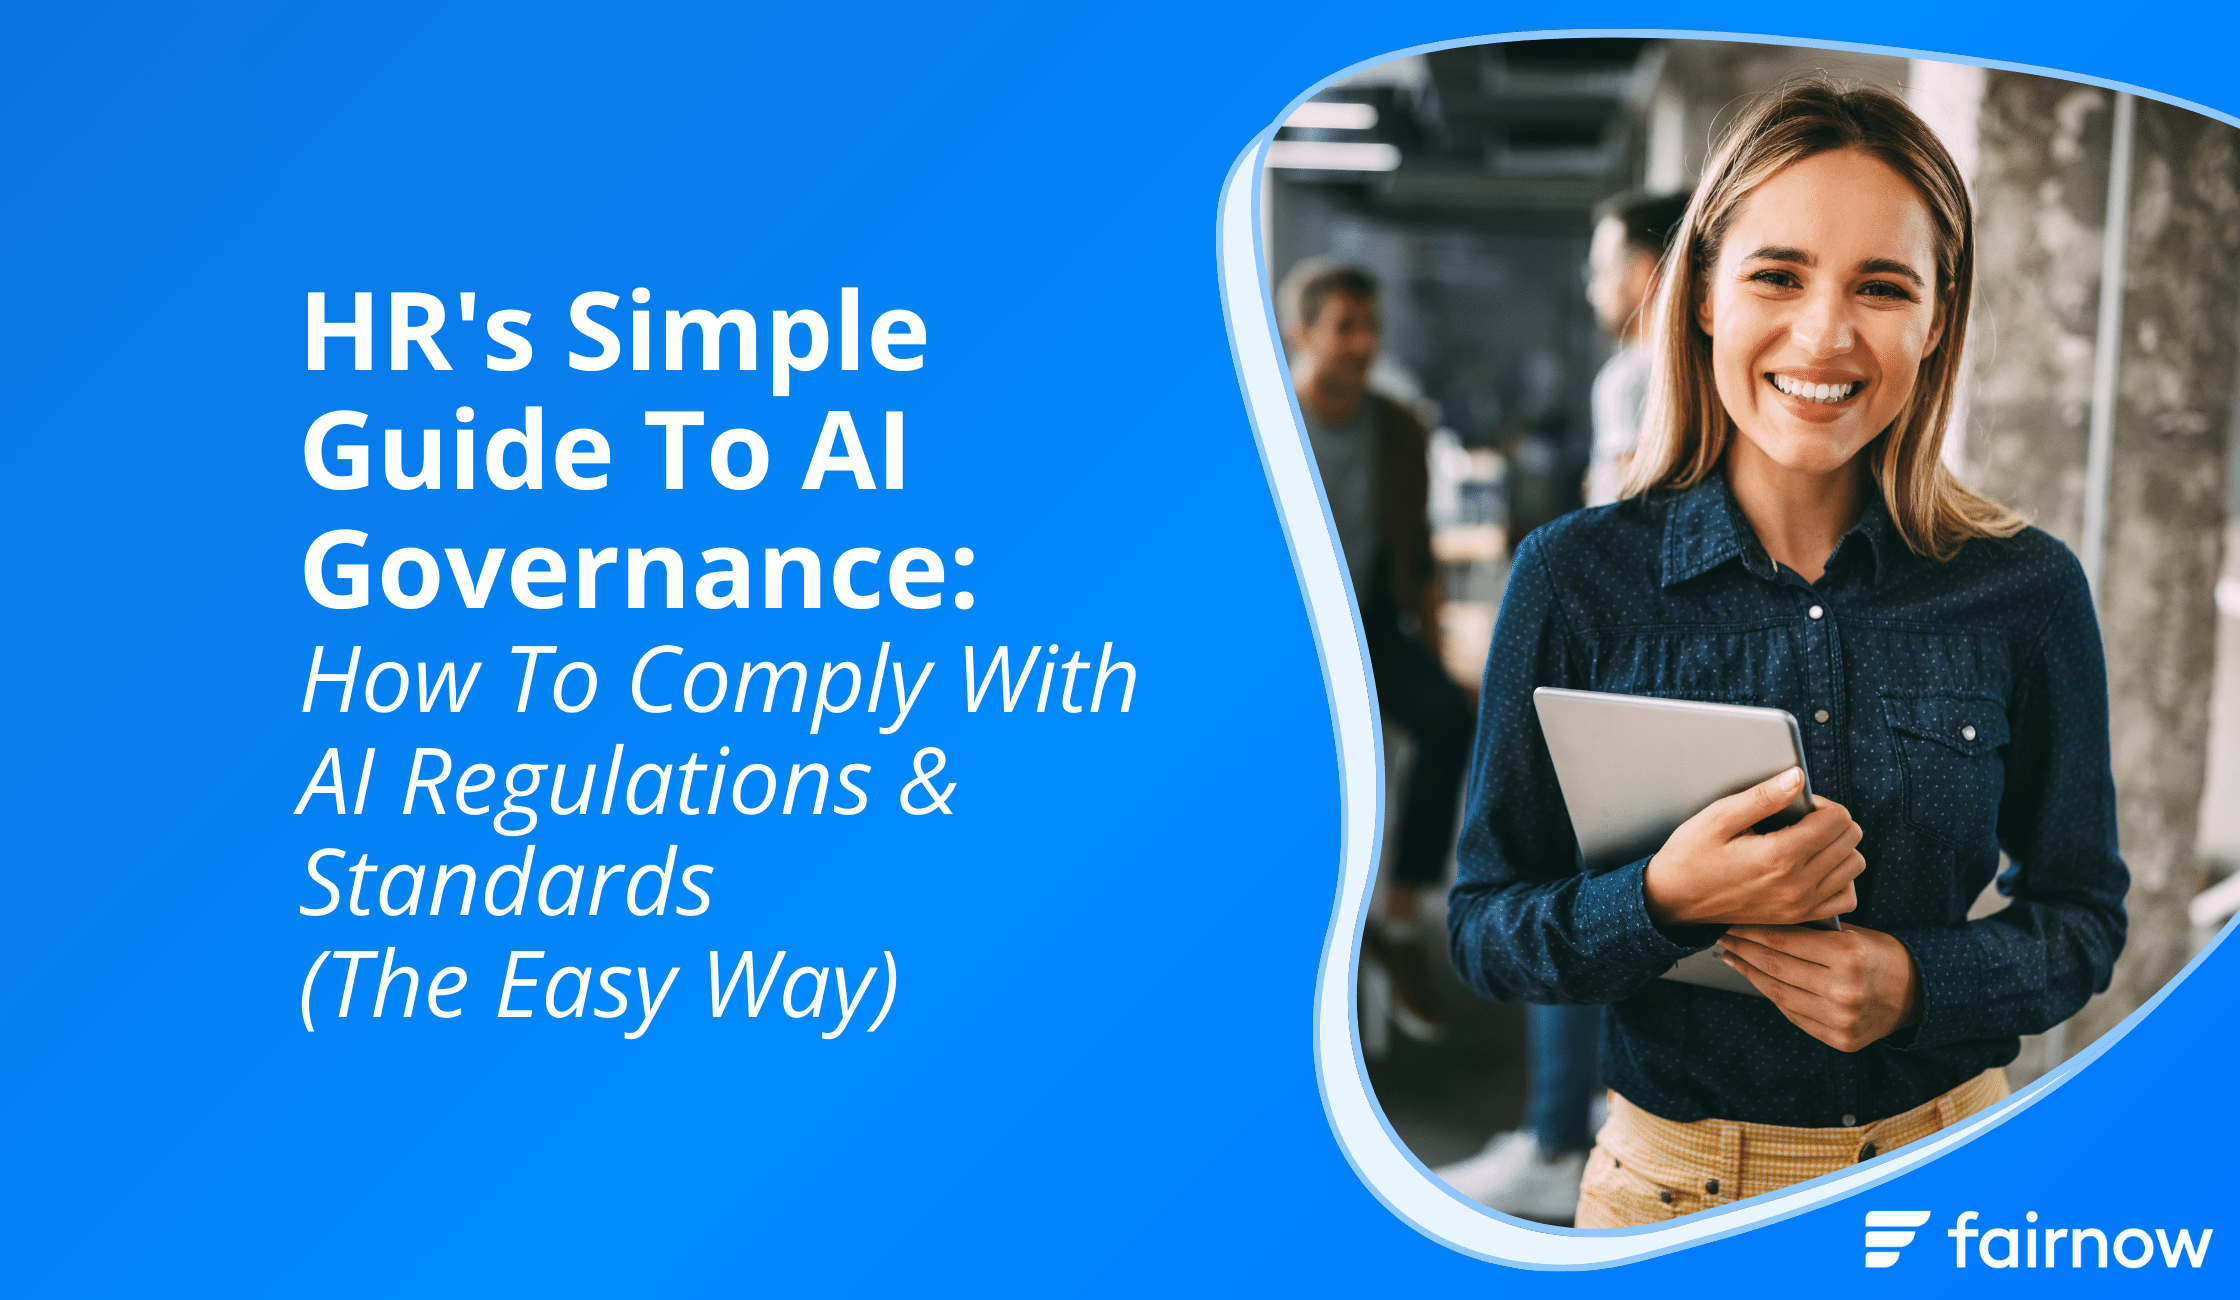 HR's Simple Guide To AI Governance: How To Comply With AI Regulations & Standards (The Easy Way)